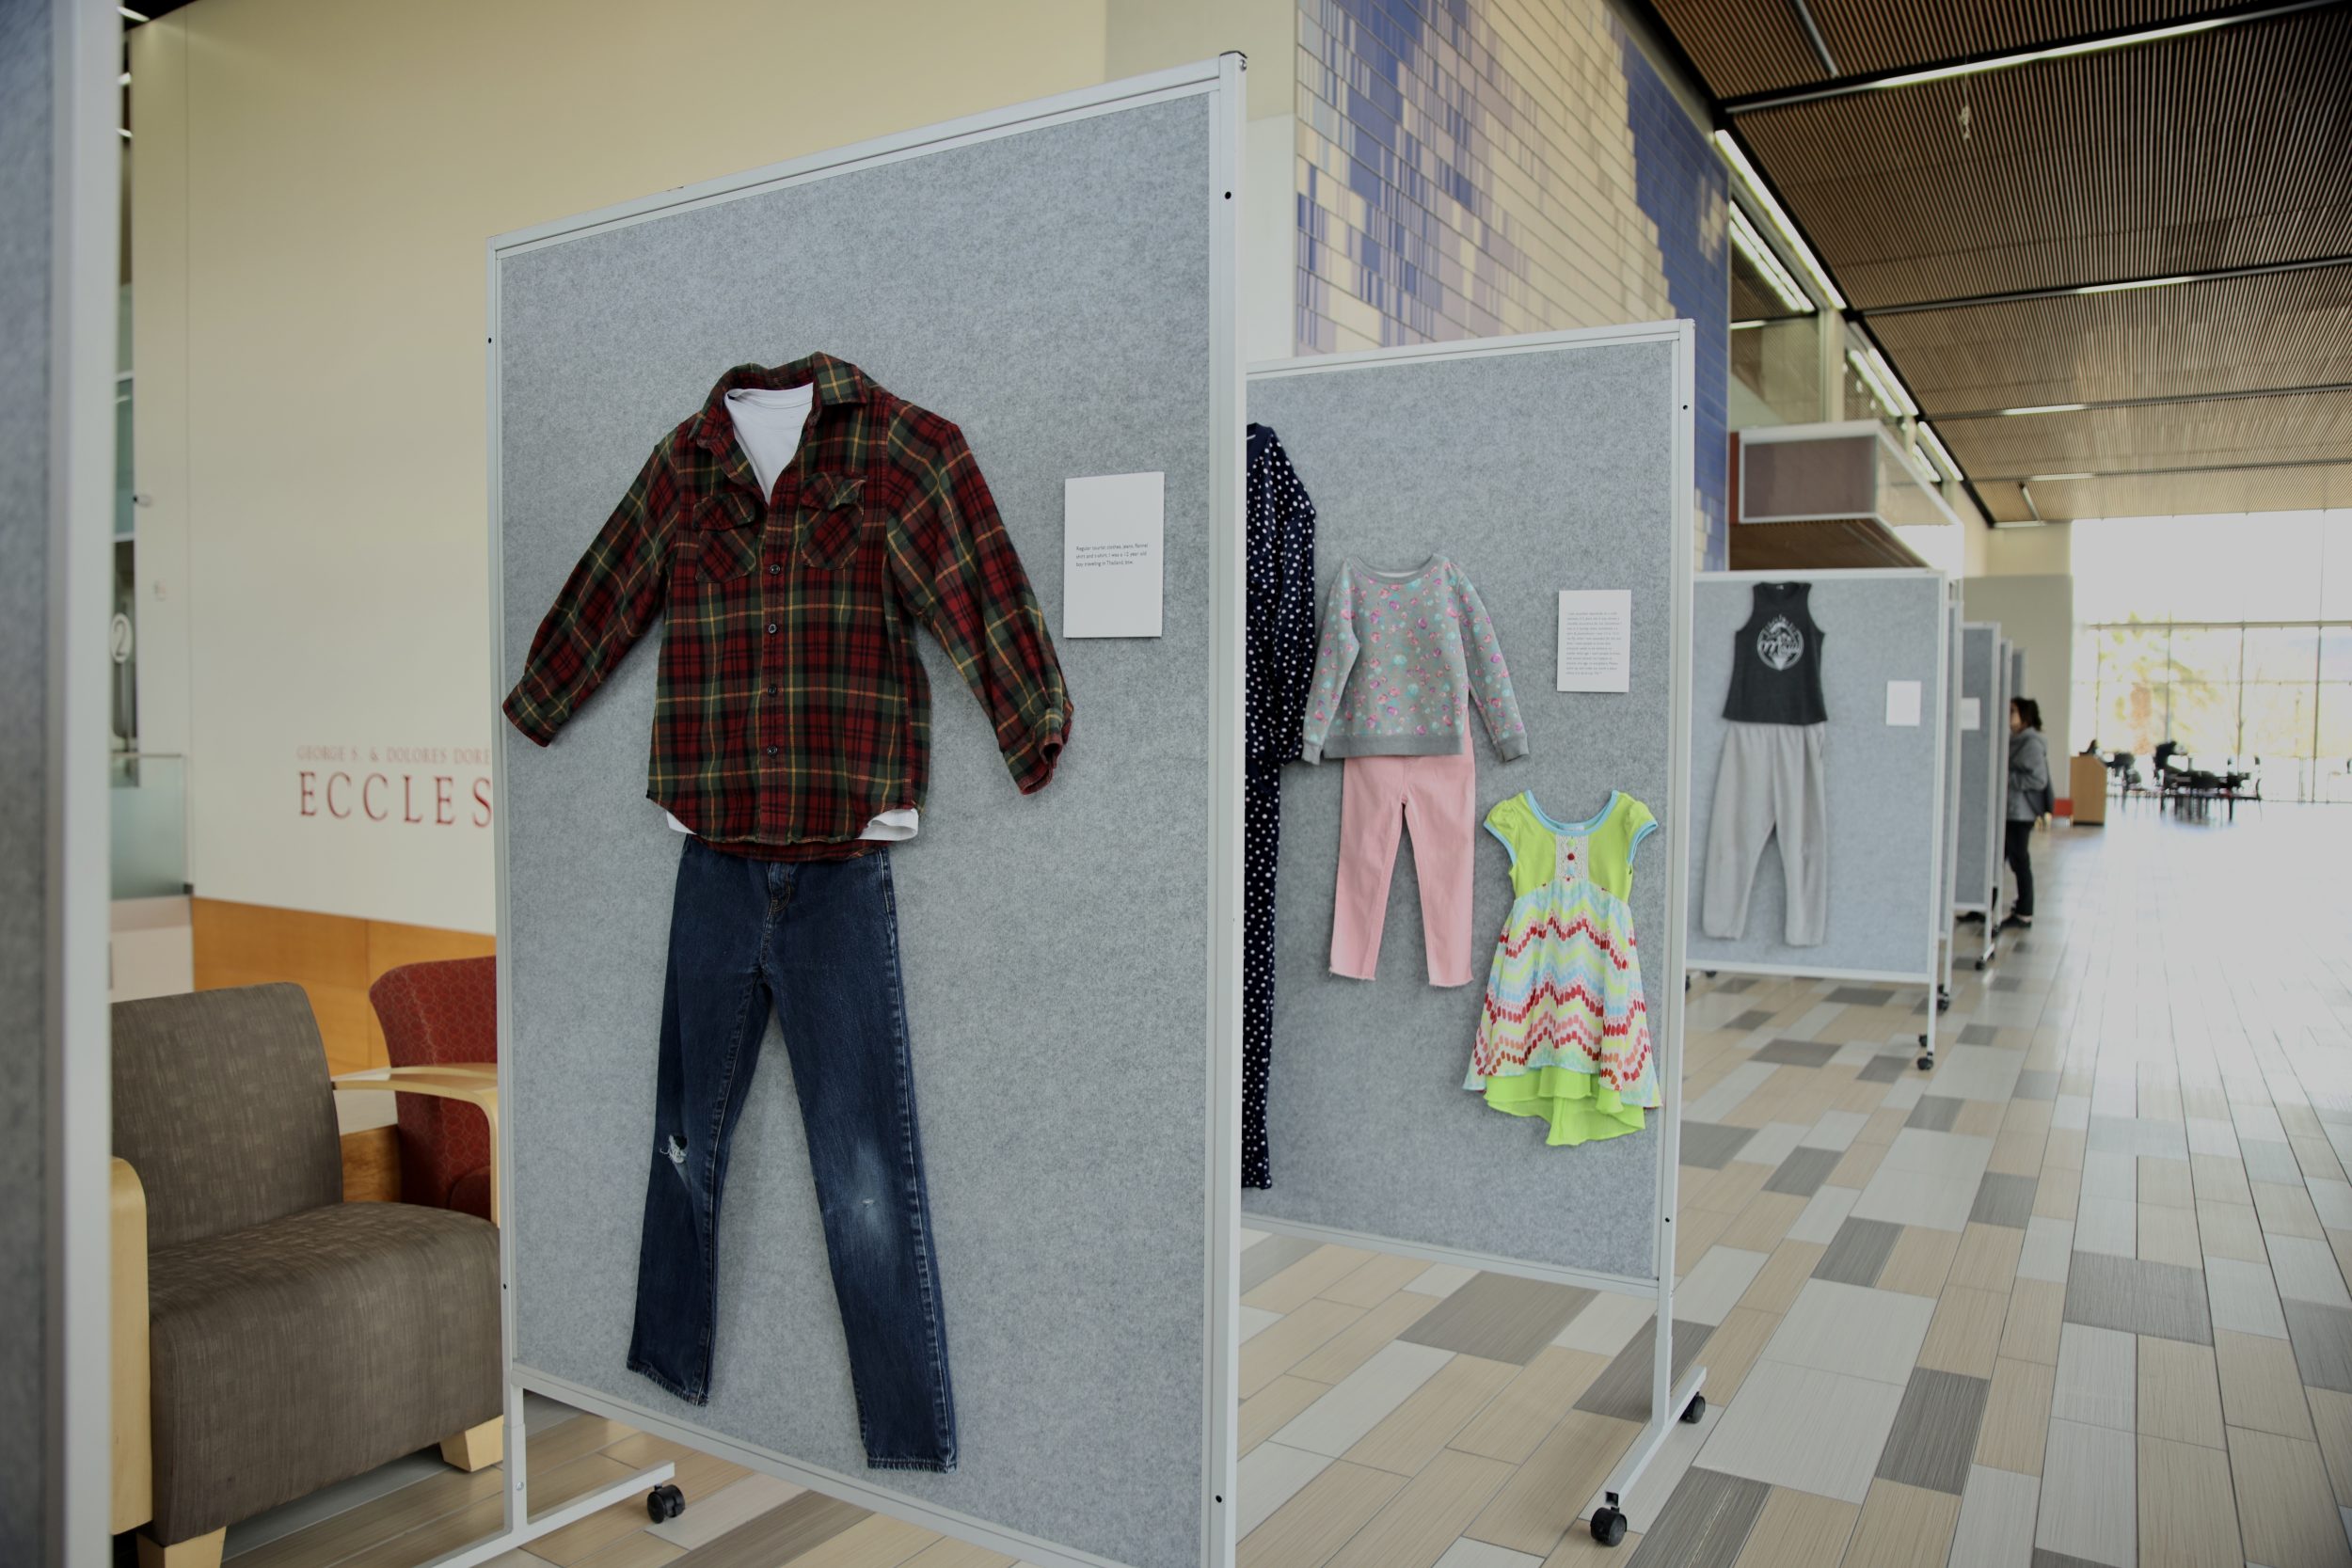 ‘What were you wearing?’ exhibit allows sexual assault victims to share their stories in an ‘anonymous but public way’